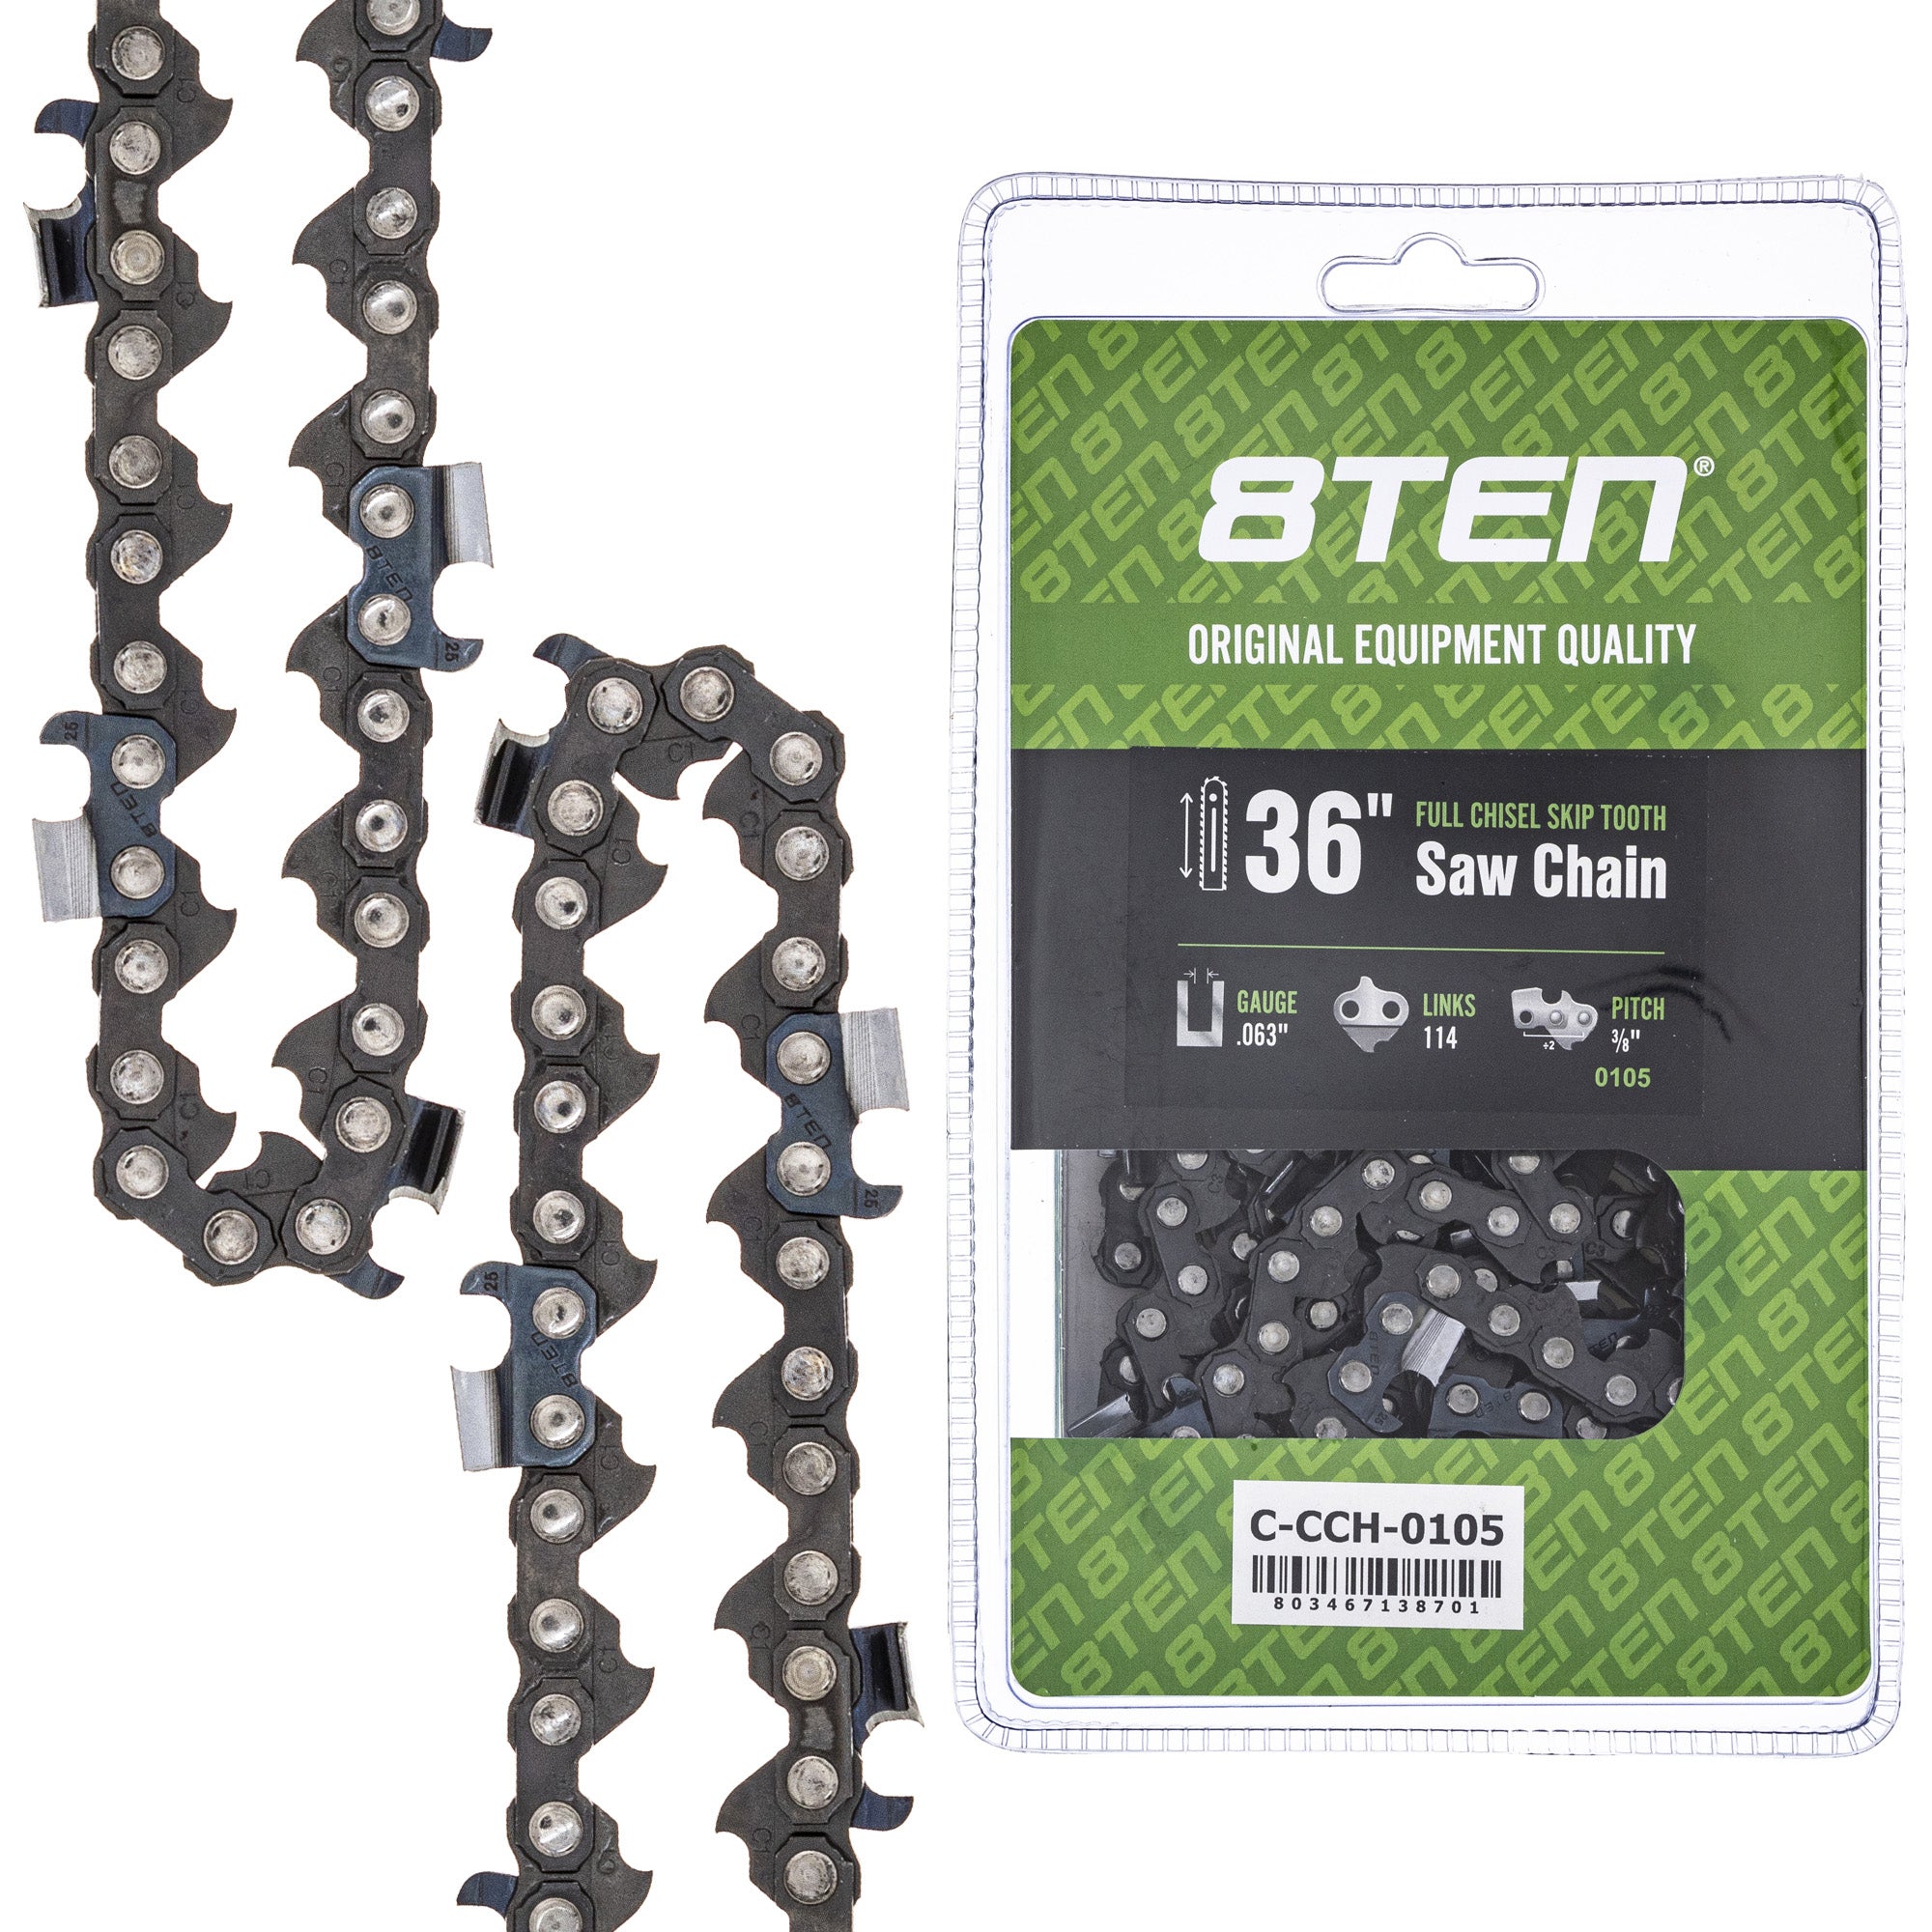 8TEN MK1010388 Guide Bar & Chain for MSE MS E 634